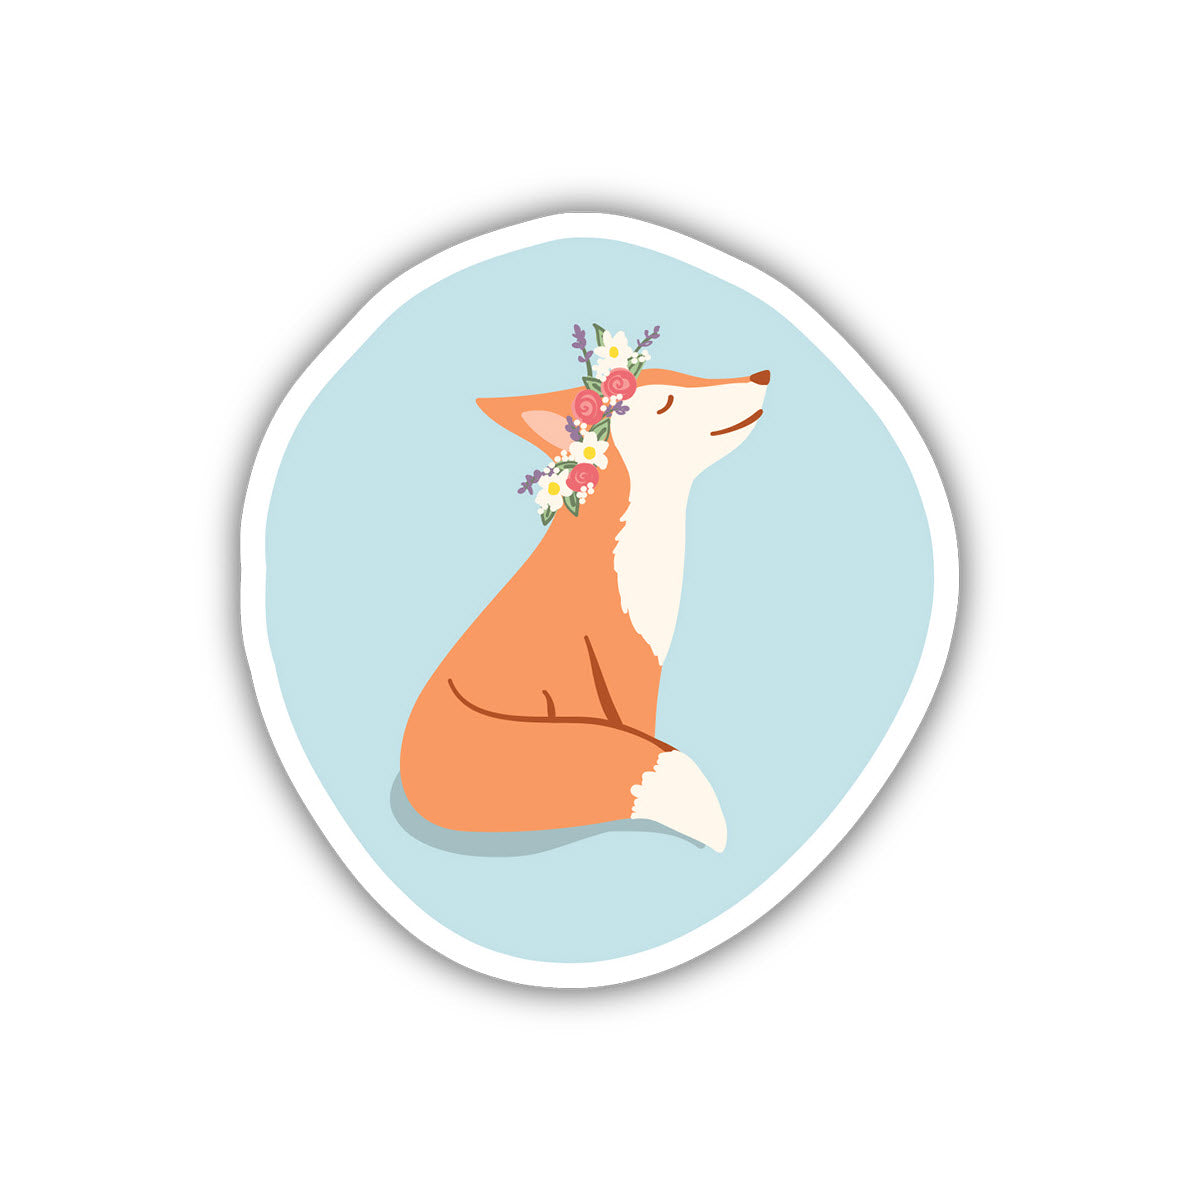 Illustration of a Stickers Northwest Fox sitting with flowers on its head against a light blue background, encircled by a white border, made in the USA.